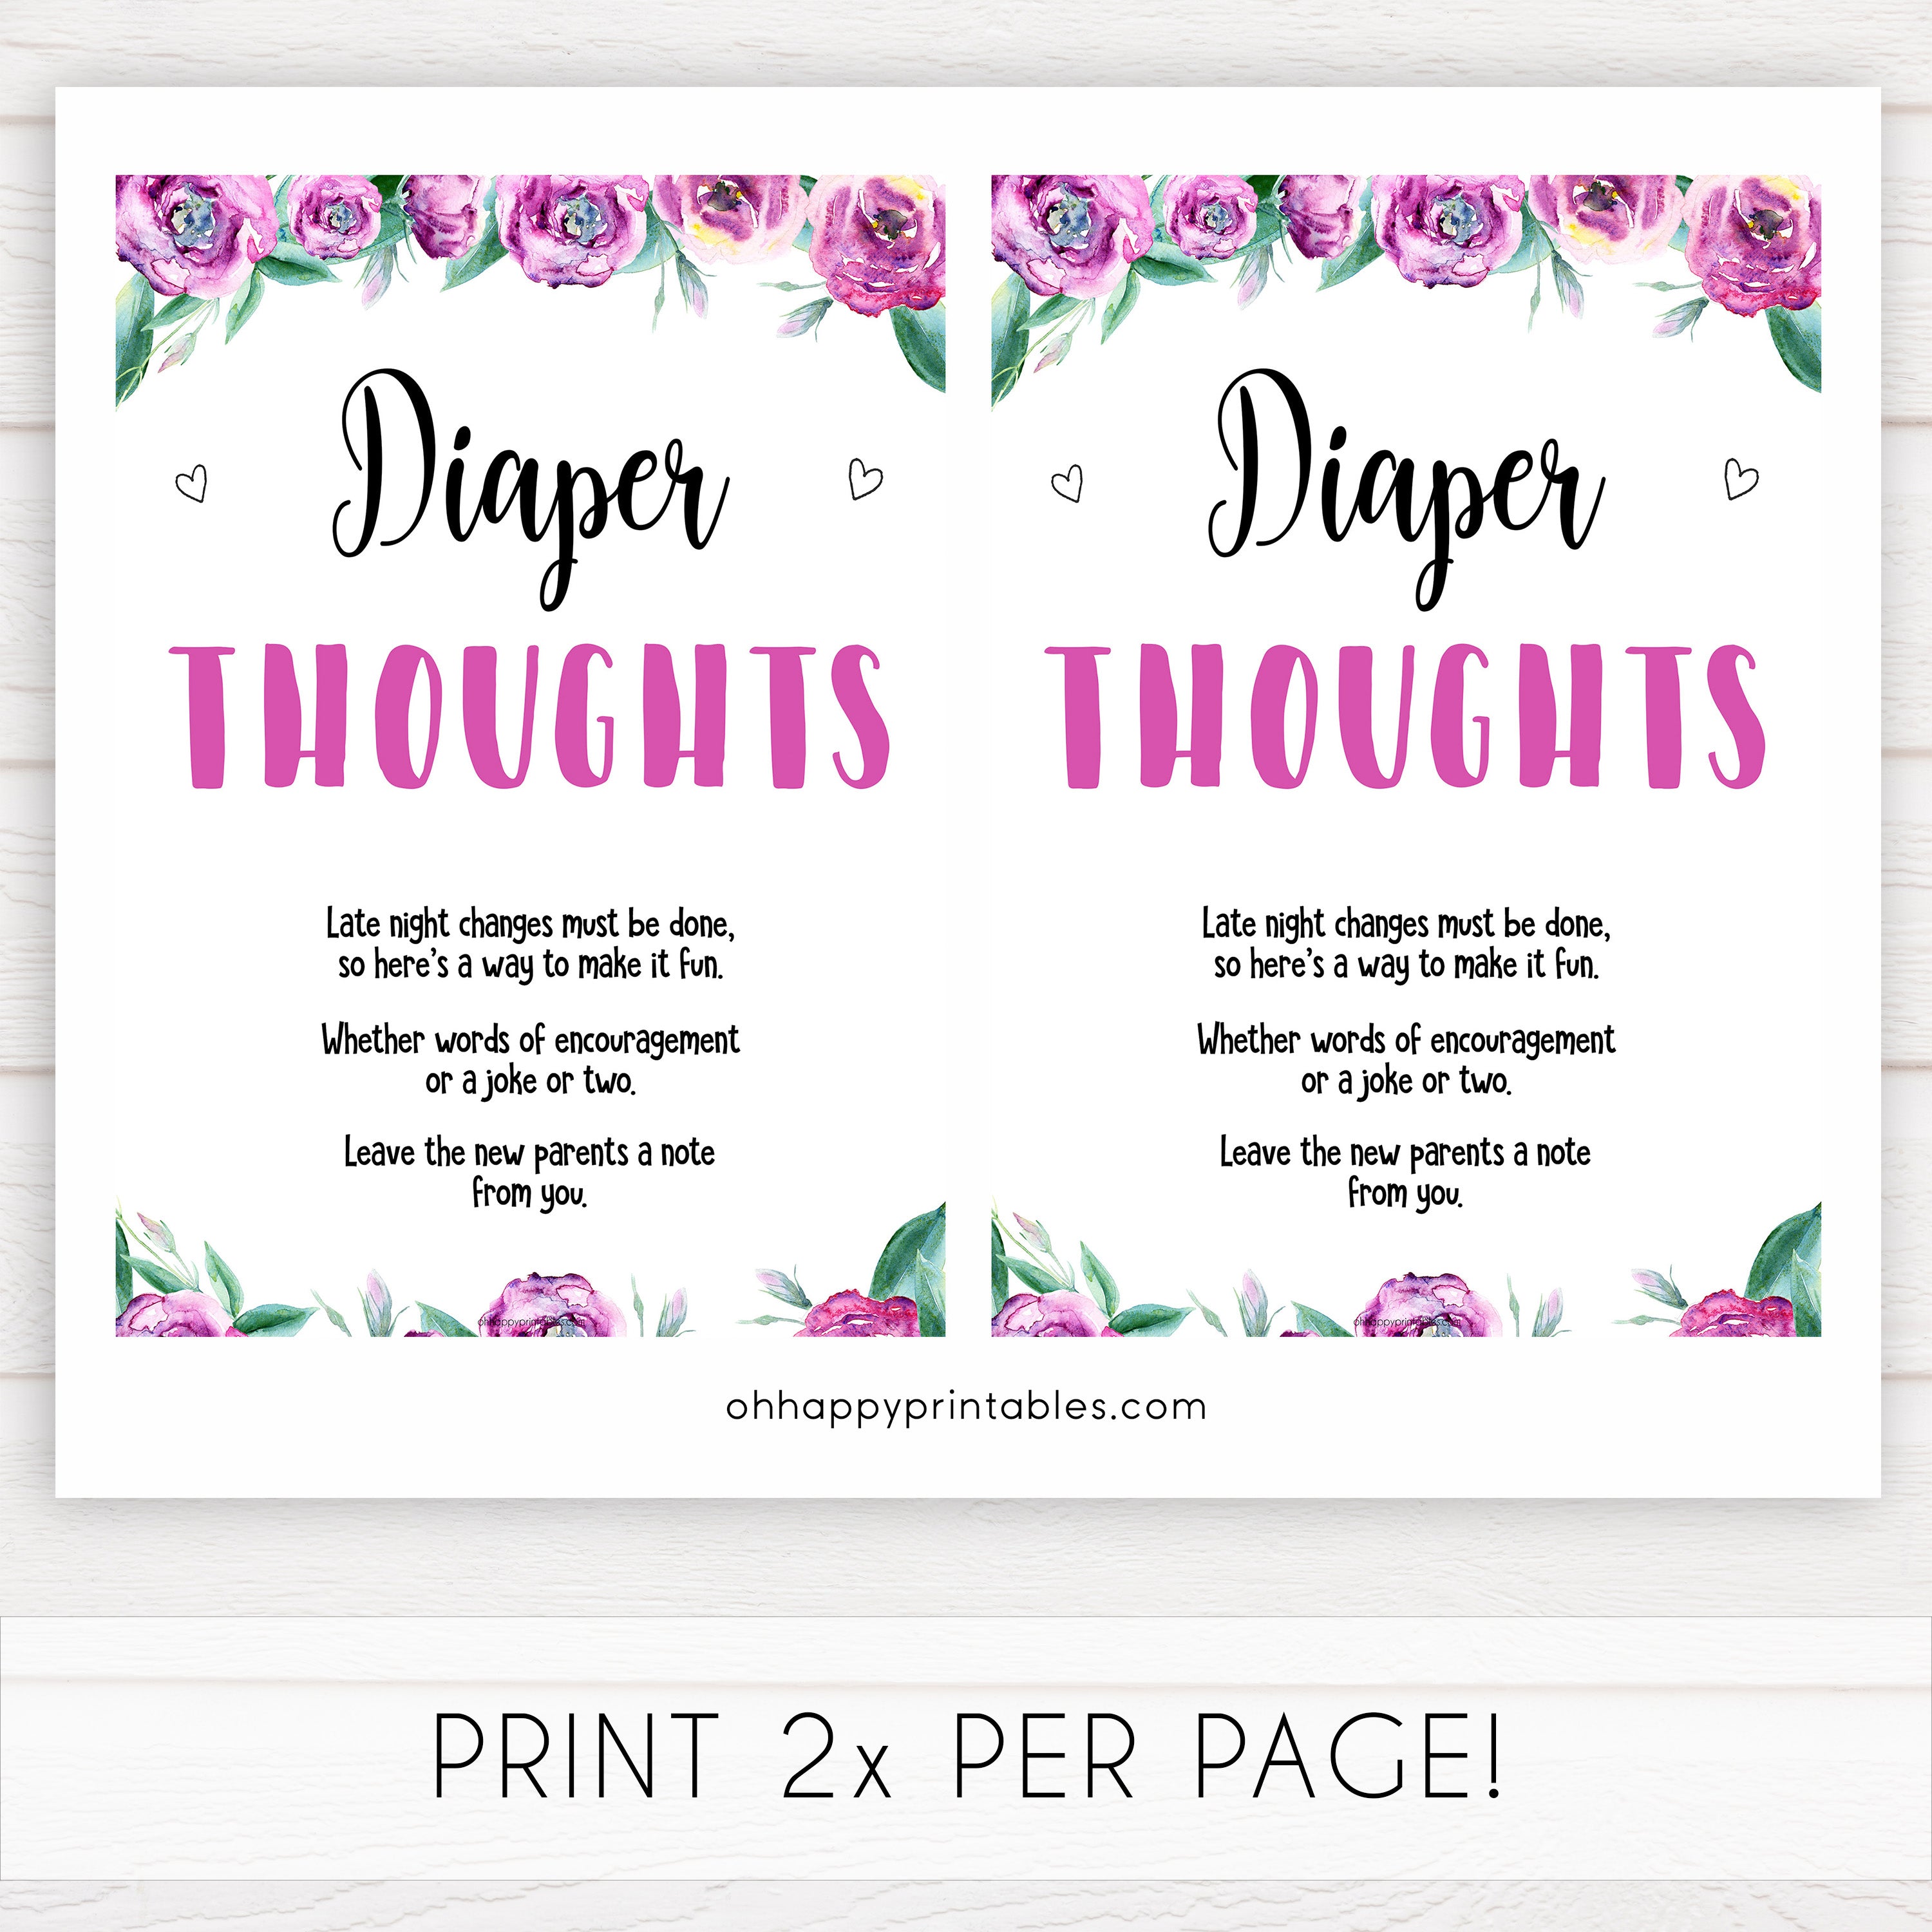 Purple peonies diaper thoughts baby shower games, printable baby shower games, fun baby shower games, baby shower games, popular baby shower games, floral baby shower games, purple baby shower themes